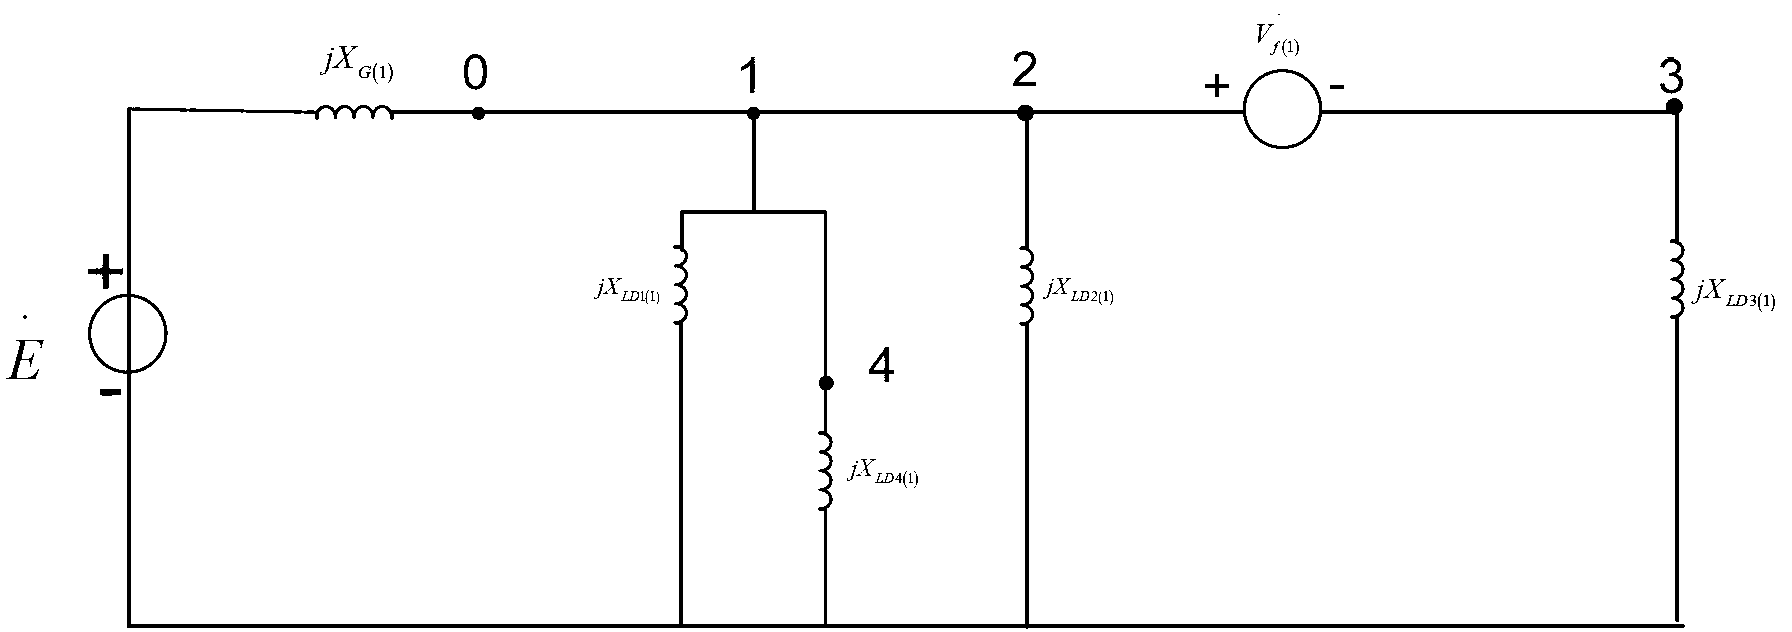 Method for locating single-phase disconnection non-ground fault of power distribution network